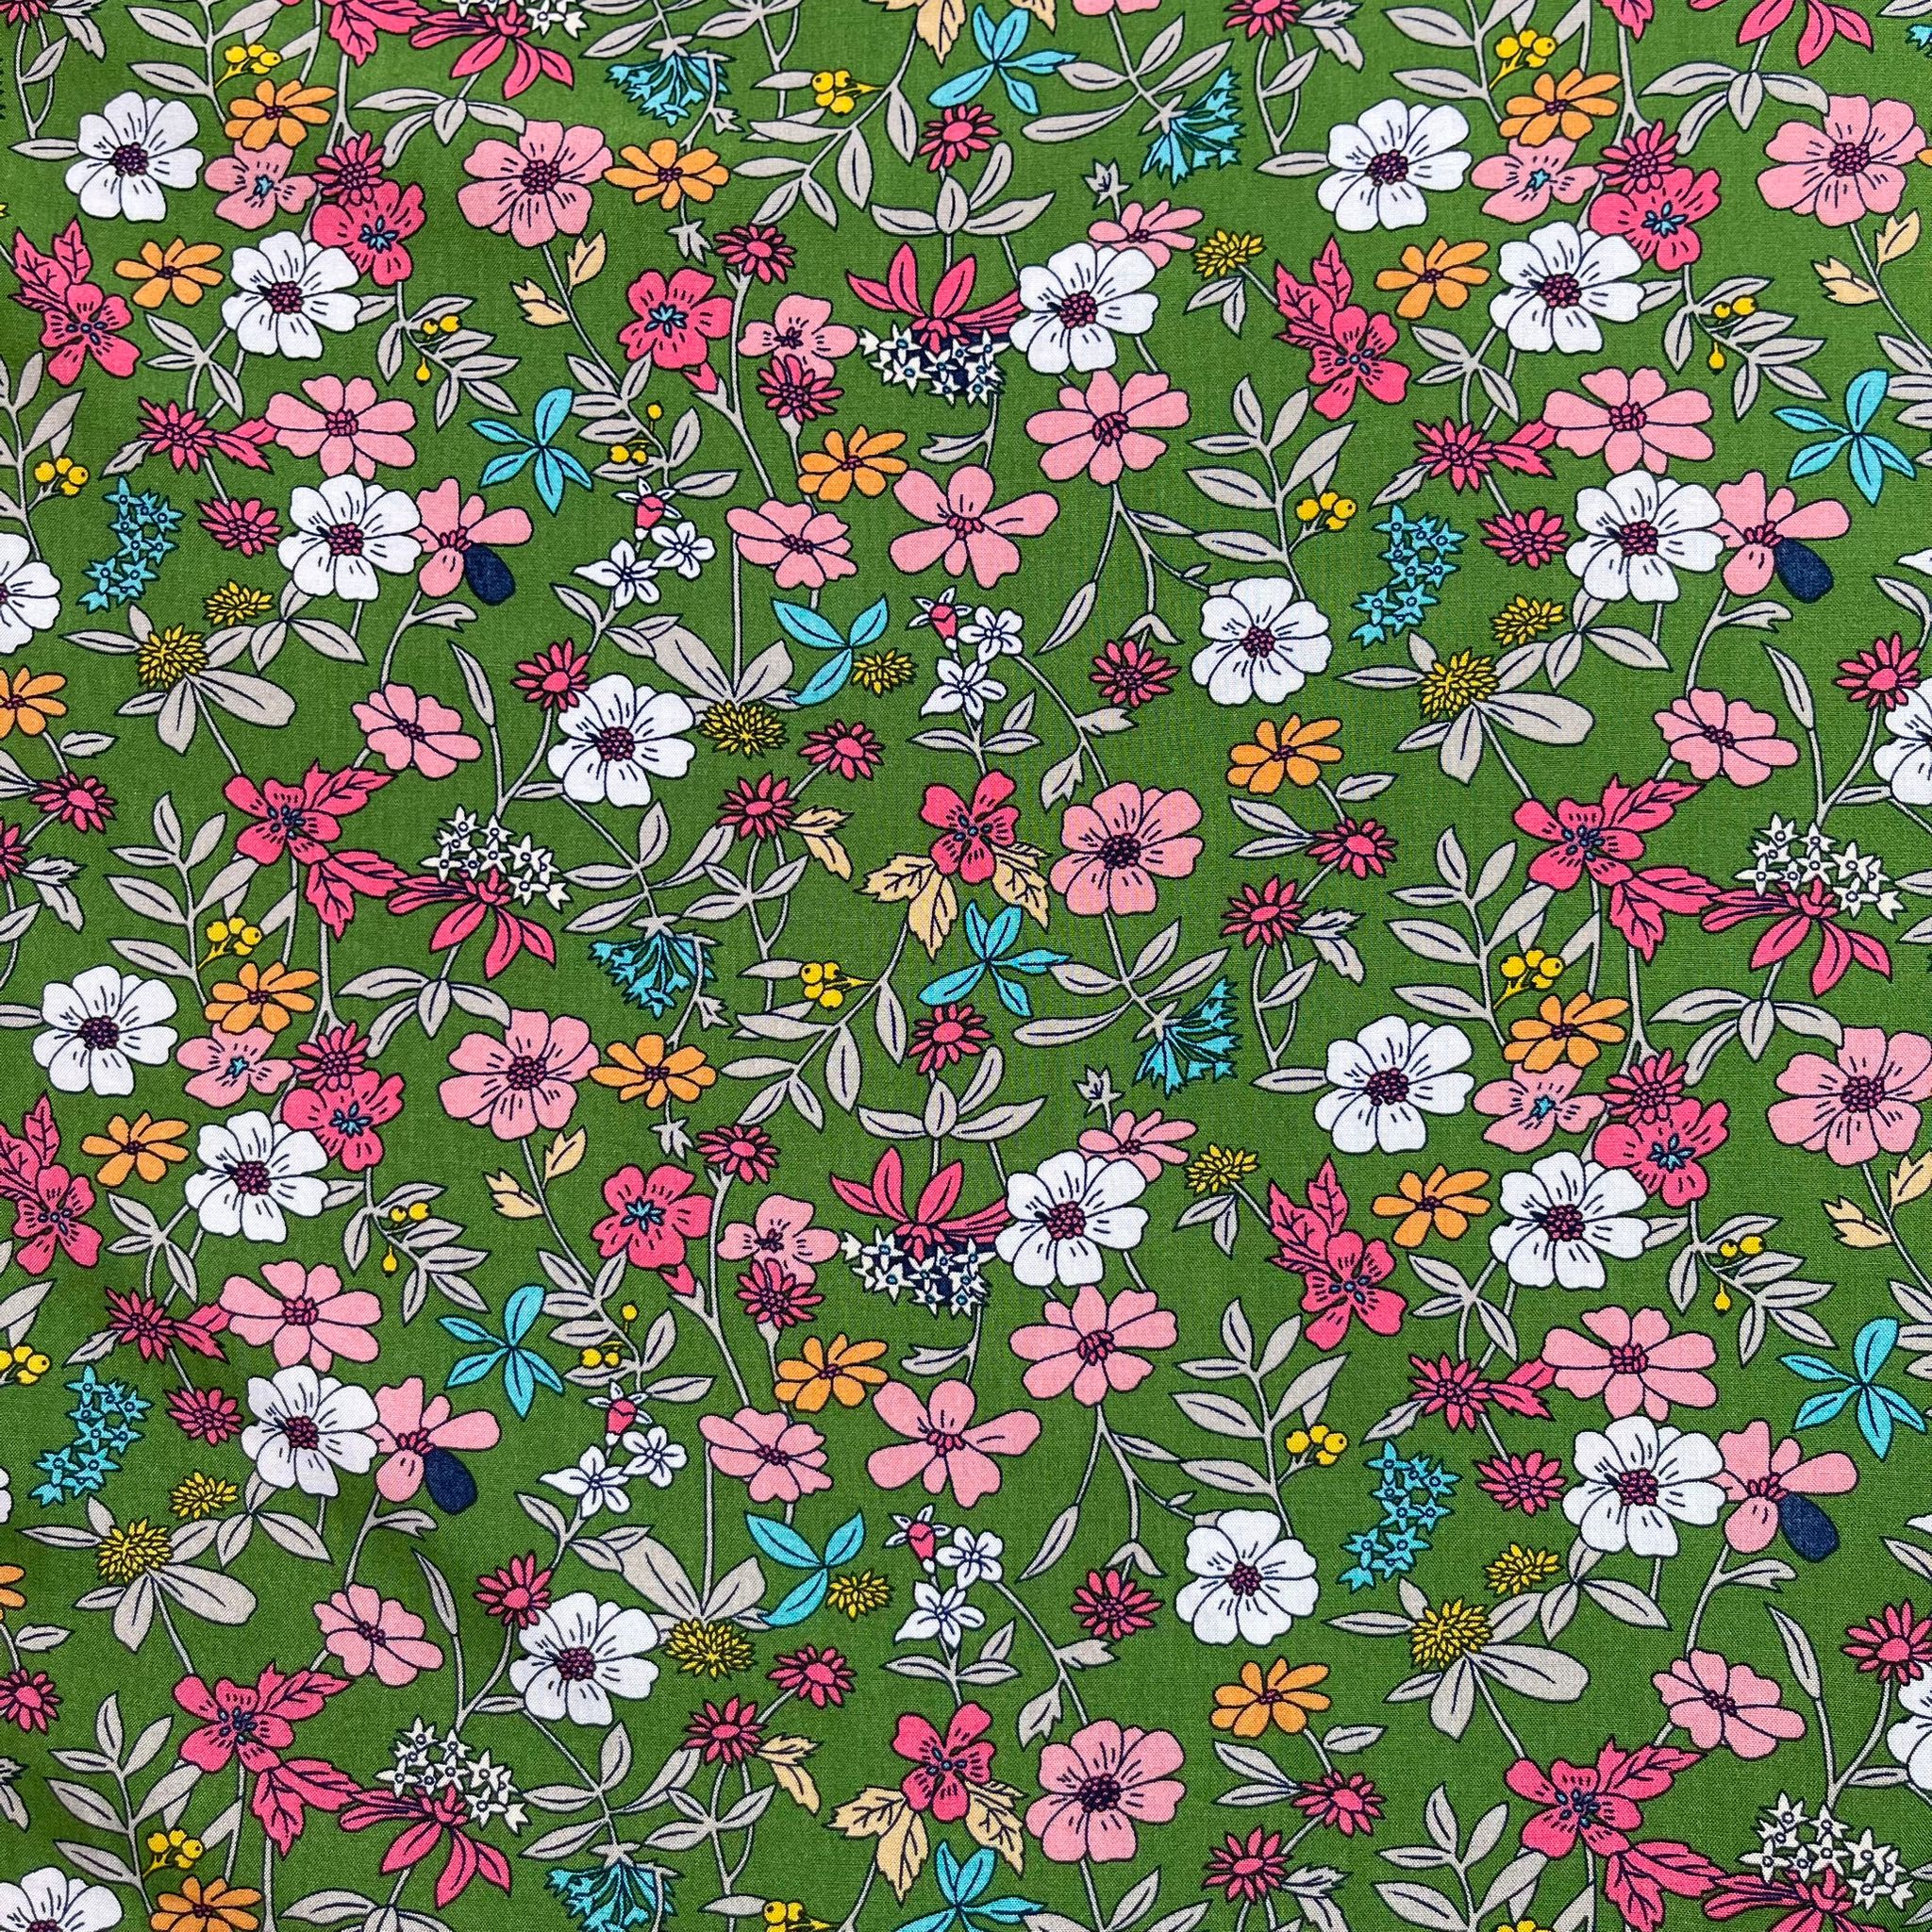 Spring Blossoms on Green Viscose Fabric